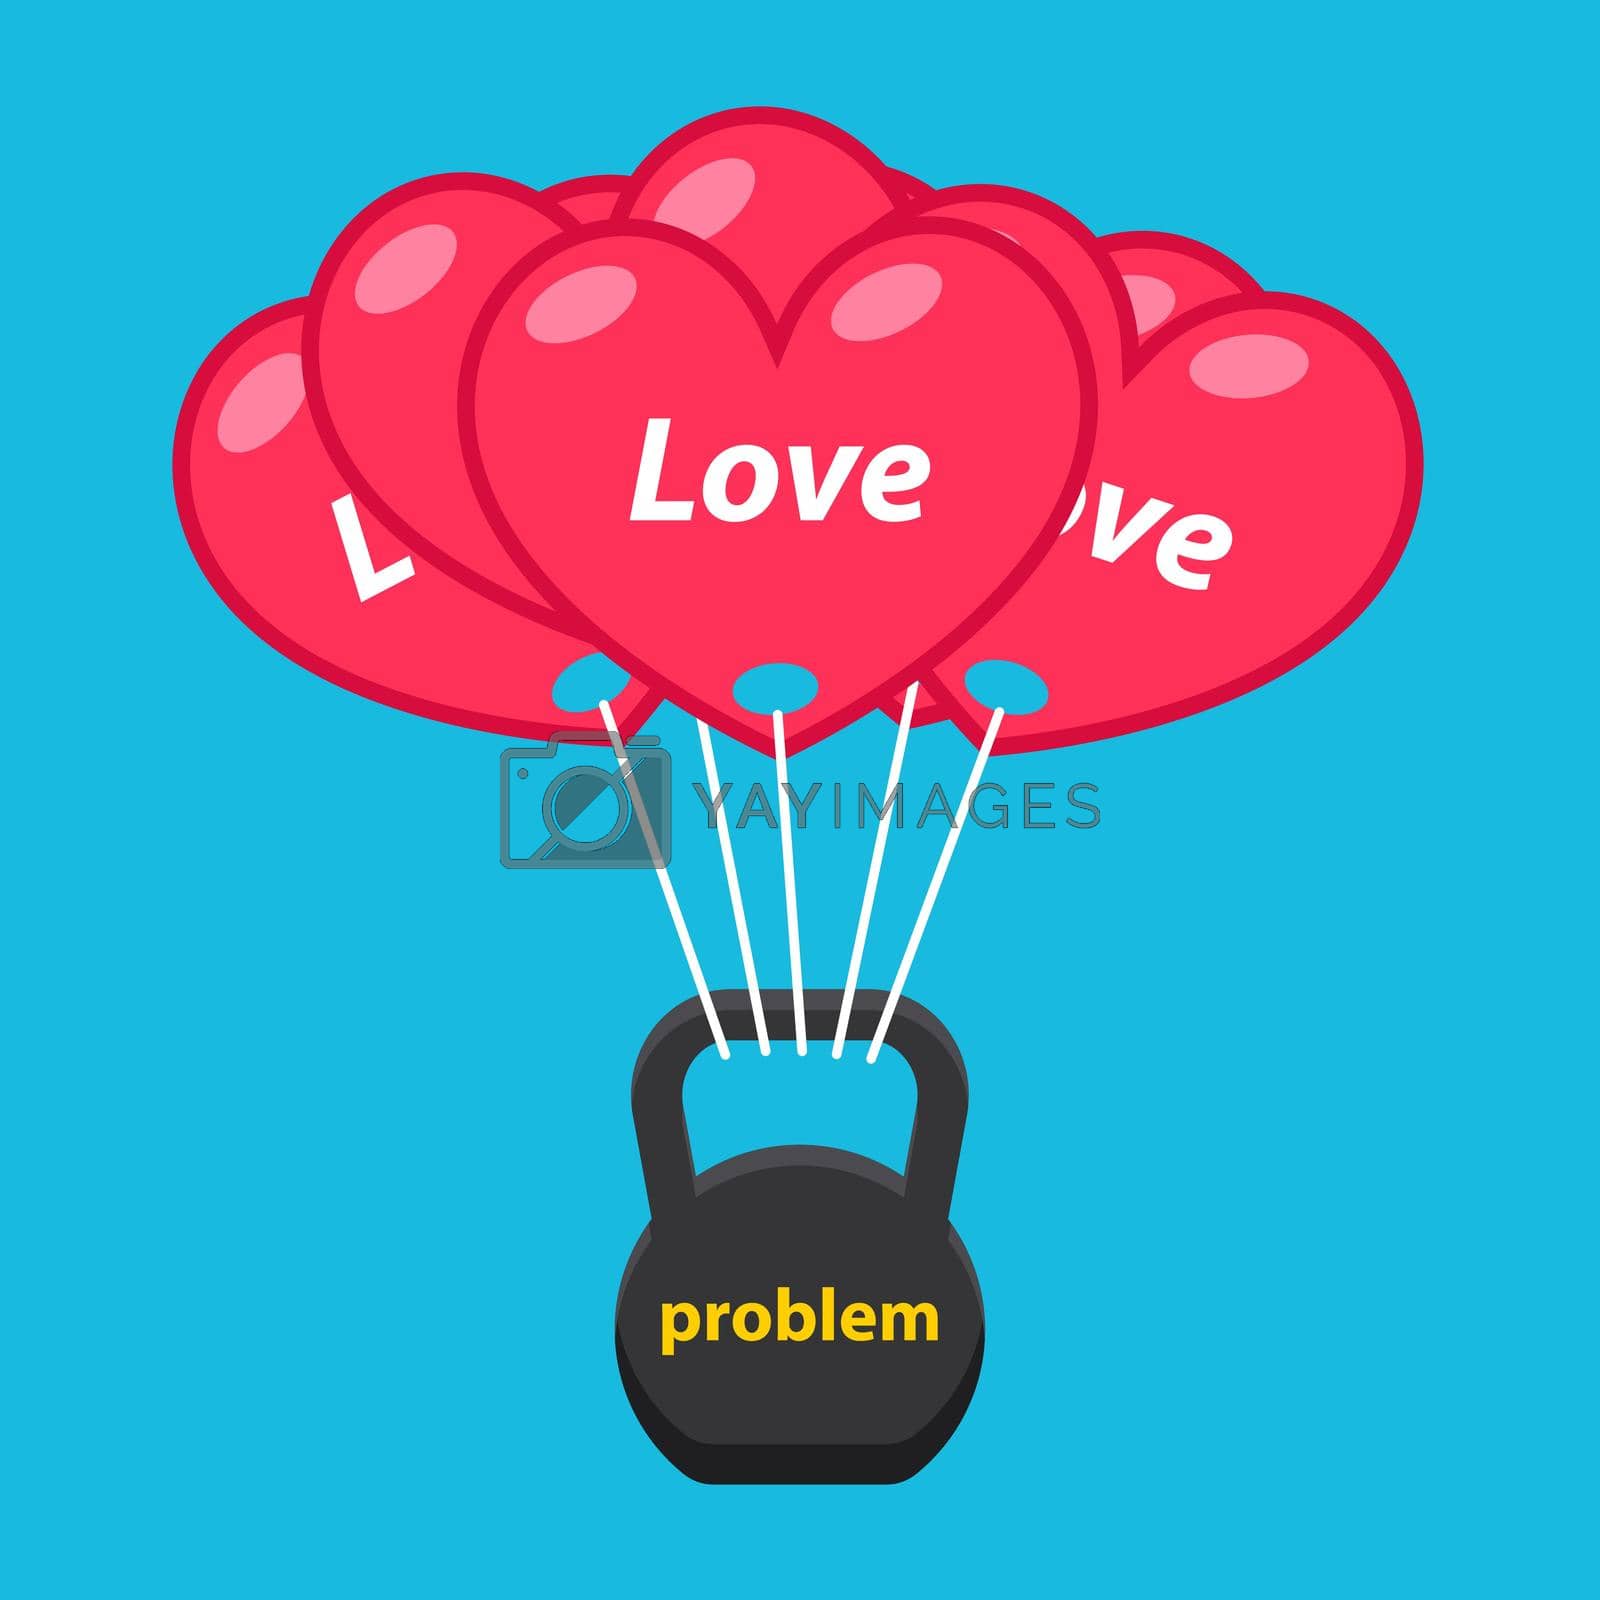 Royalty free image of balloons of love raise a heavy weight of problems. by PlutusART